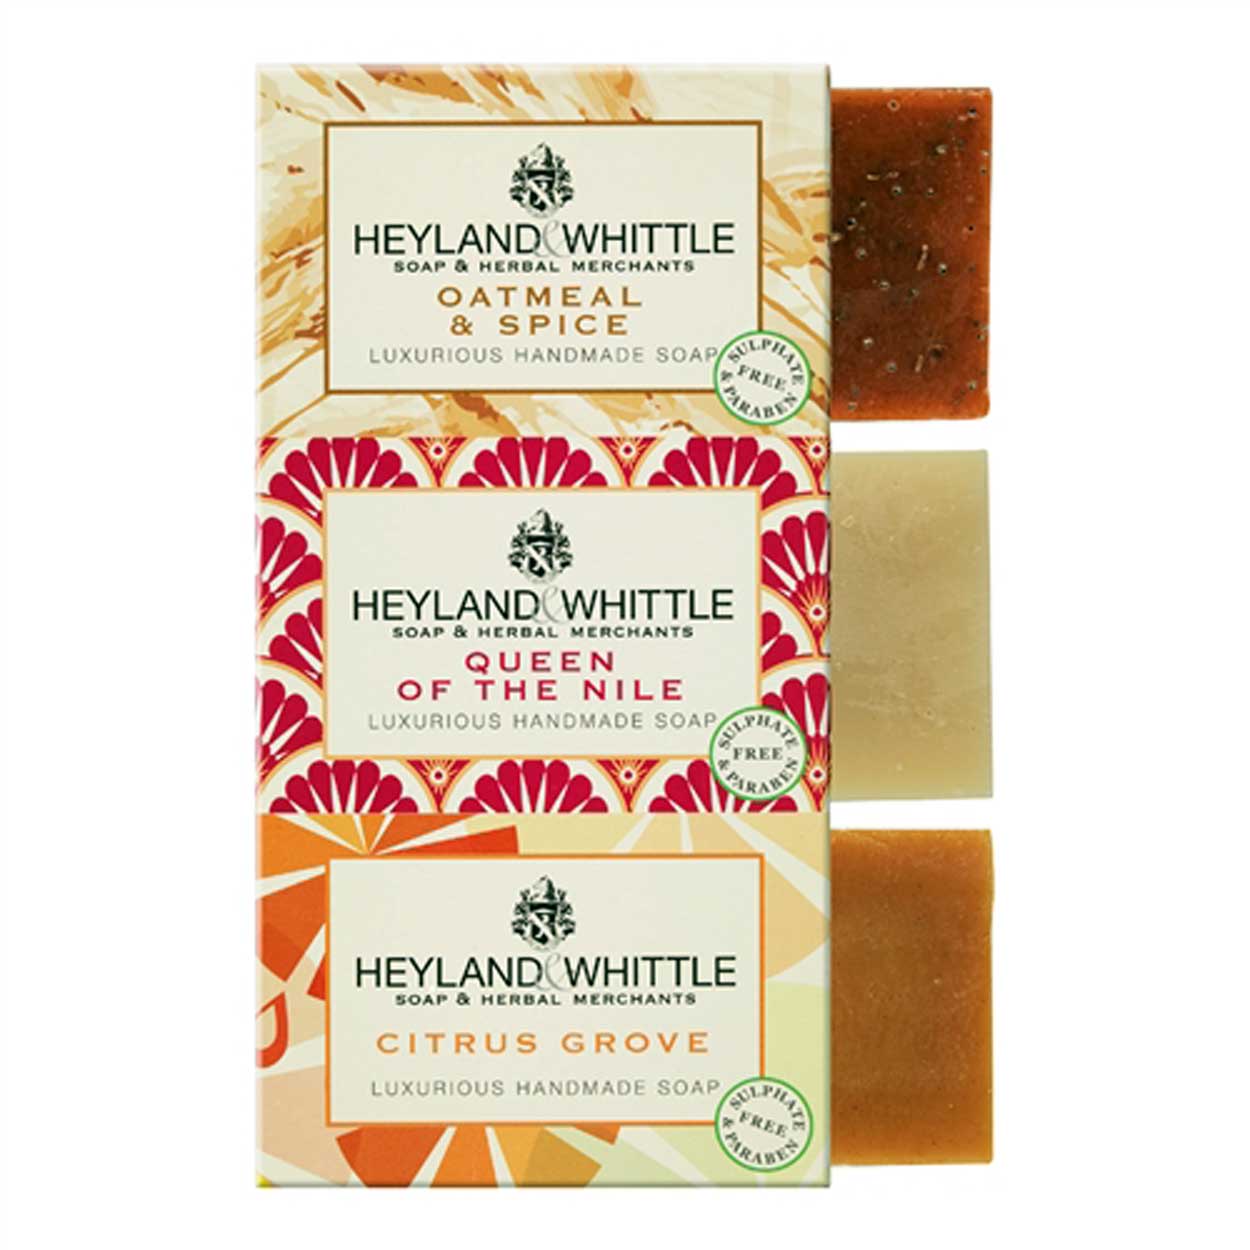 Heyland & Whittle Soap Trio - Oatmeal & Spice, Queen of the Nile, Citrus Grove